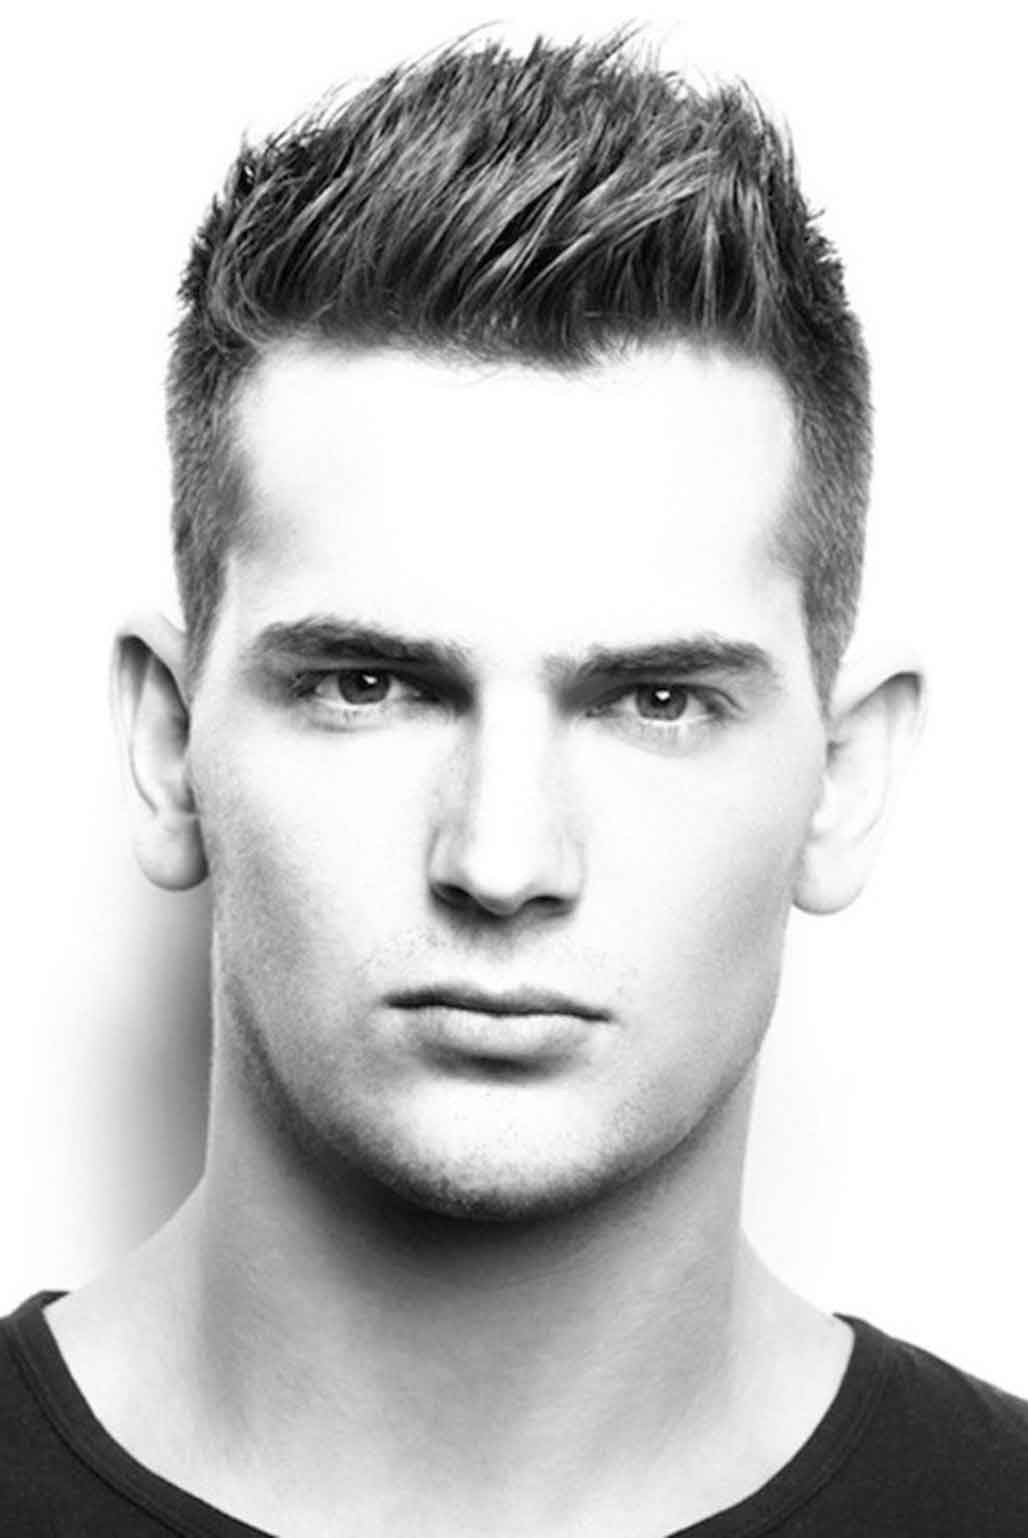 Hairstyles For Square Faces Male
 Hairstyle For Square Face Male Black Wavy Haircut